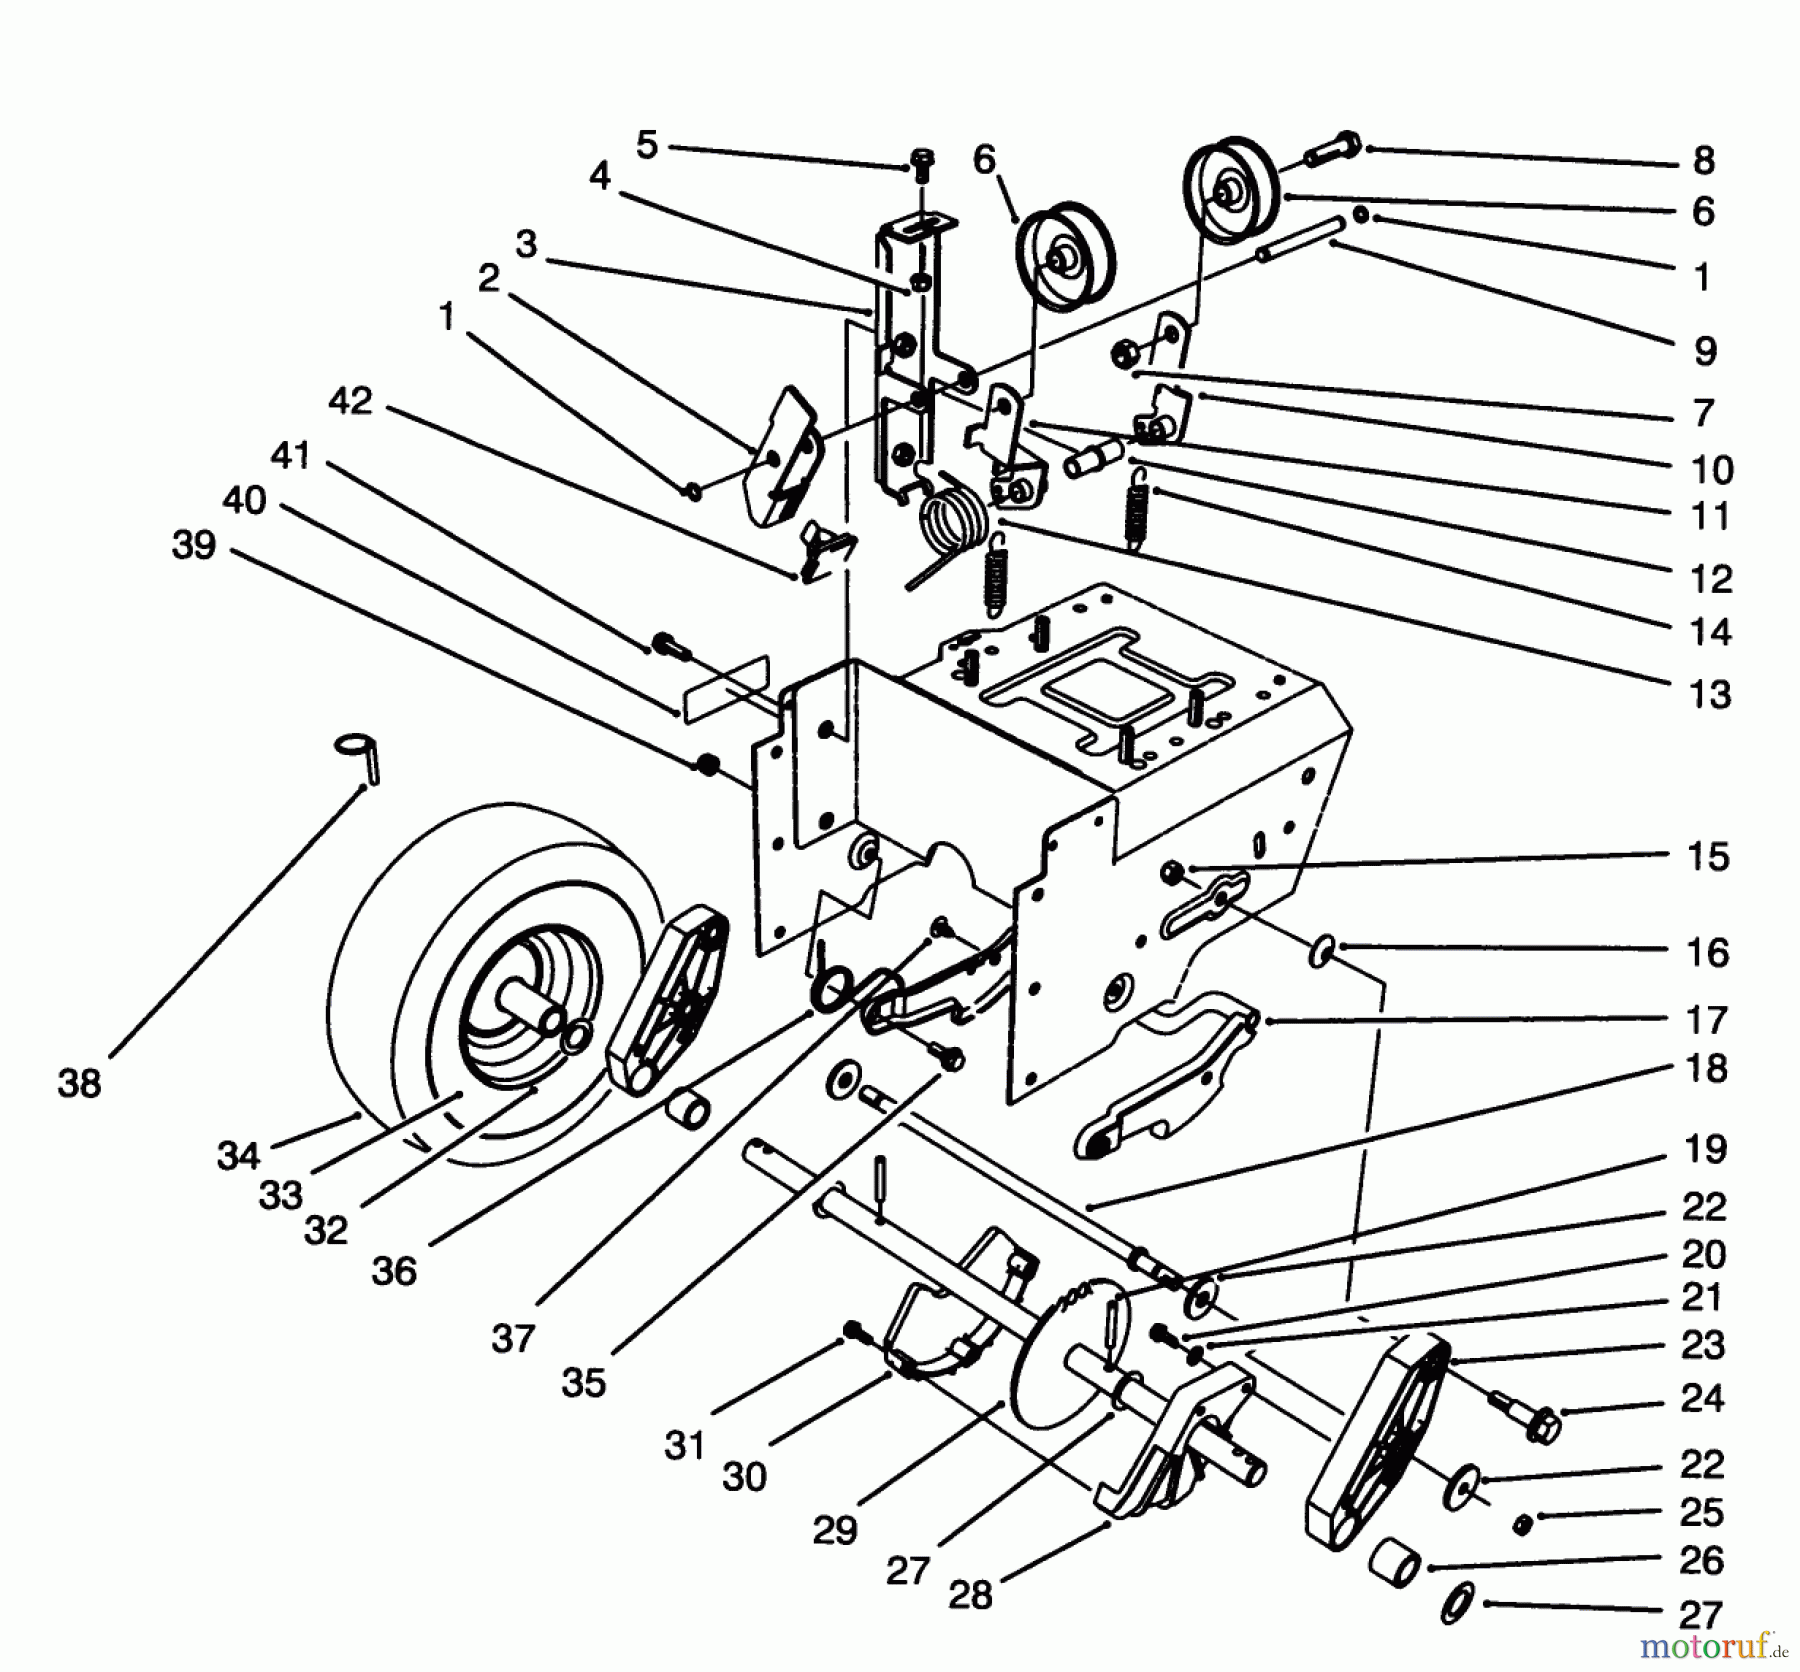  Toro Neu Snow Blowers/Snow Throwers Seite 1 38570 (828) - Toro 828 Power Shift Snowthrower, 1994 (4900001-4999999) TRACTION DRIVE ASSEMBLY